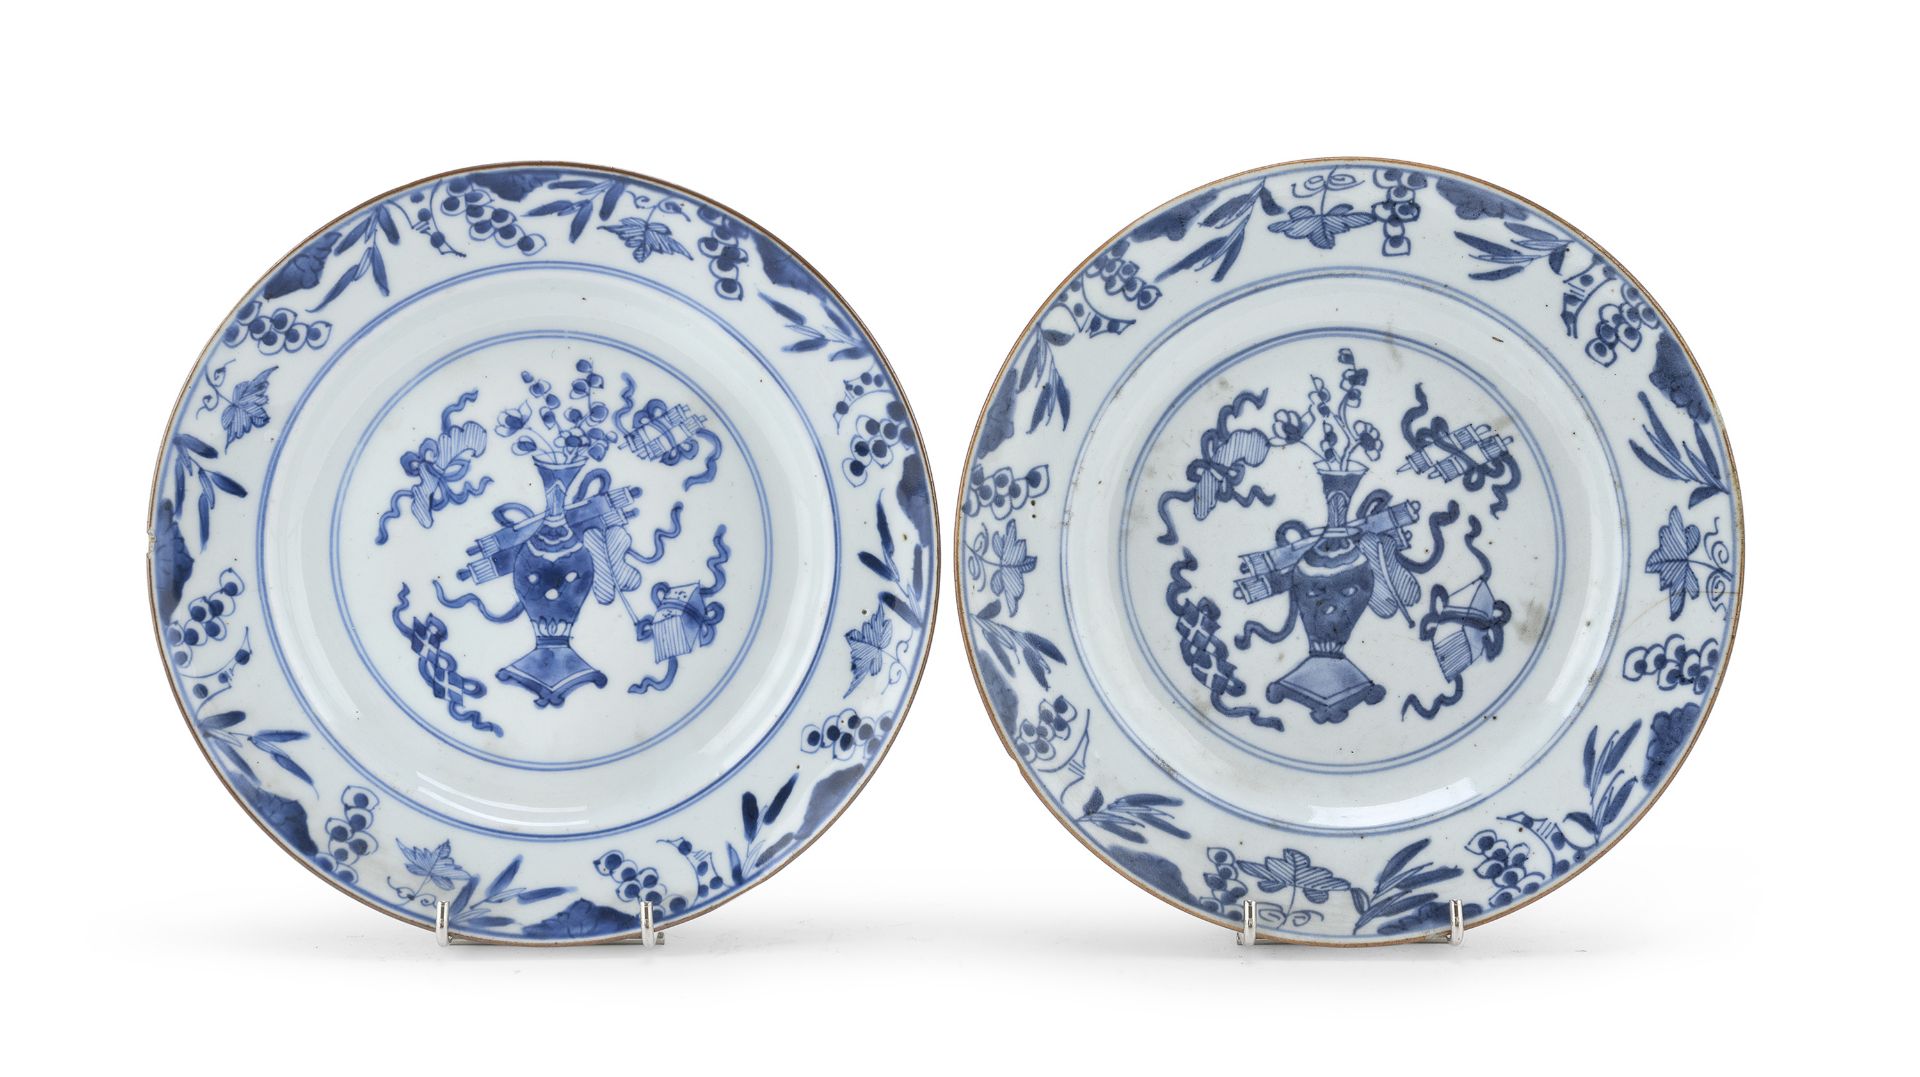 PAIR OF WHITE AND BLUE PORCELAIN DISHES CHINA LATE 18TH CENTURY